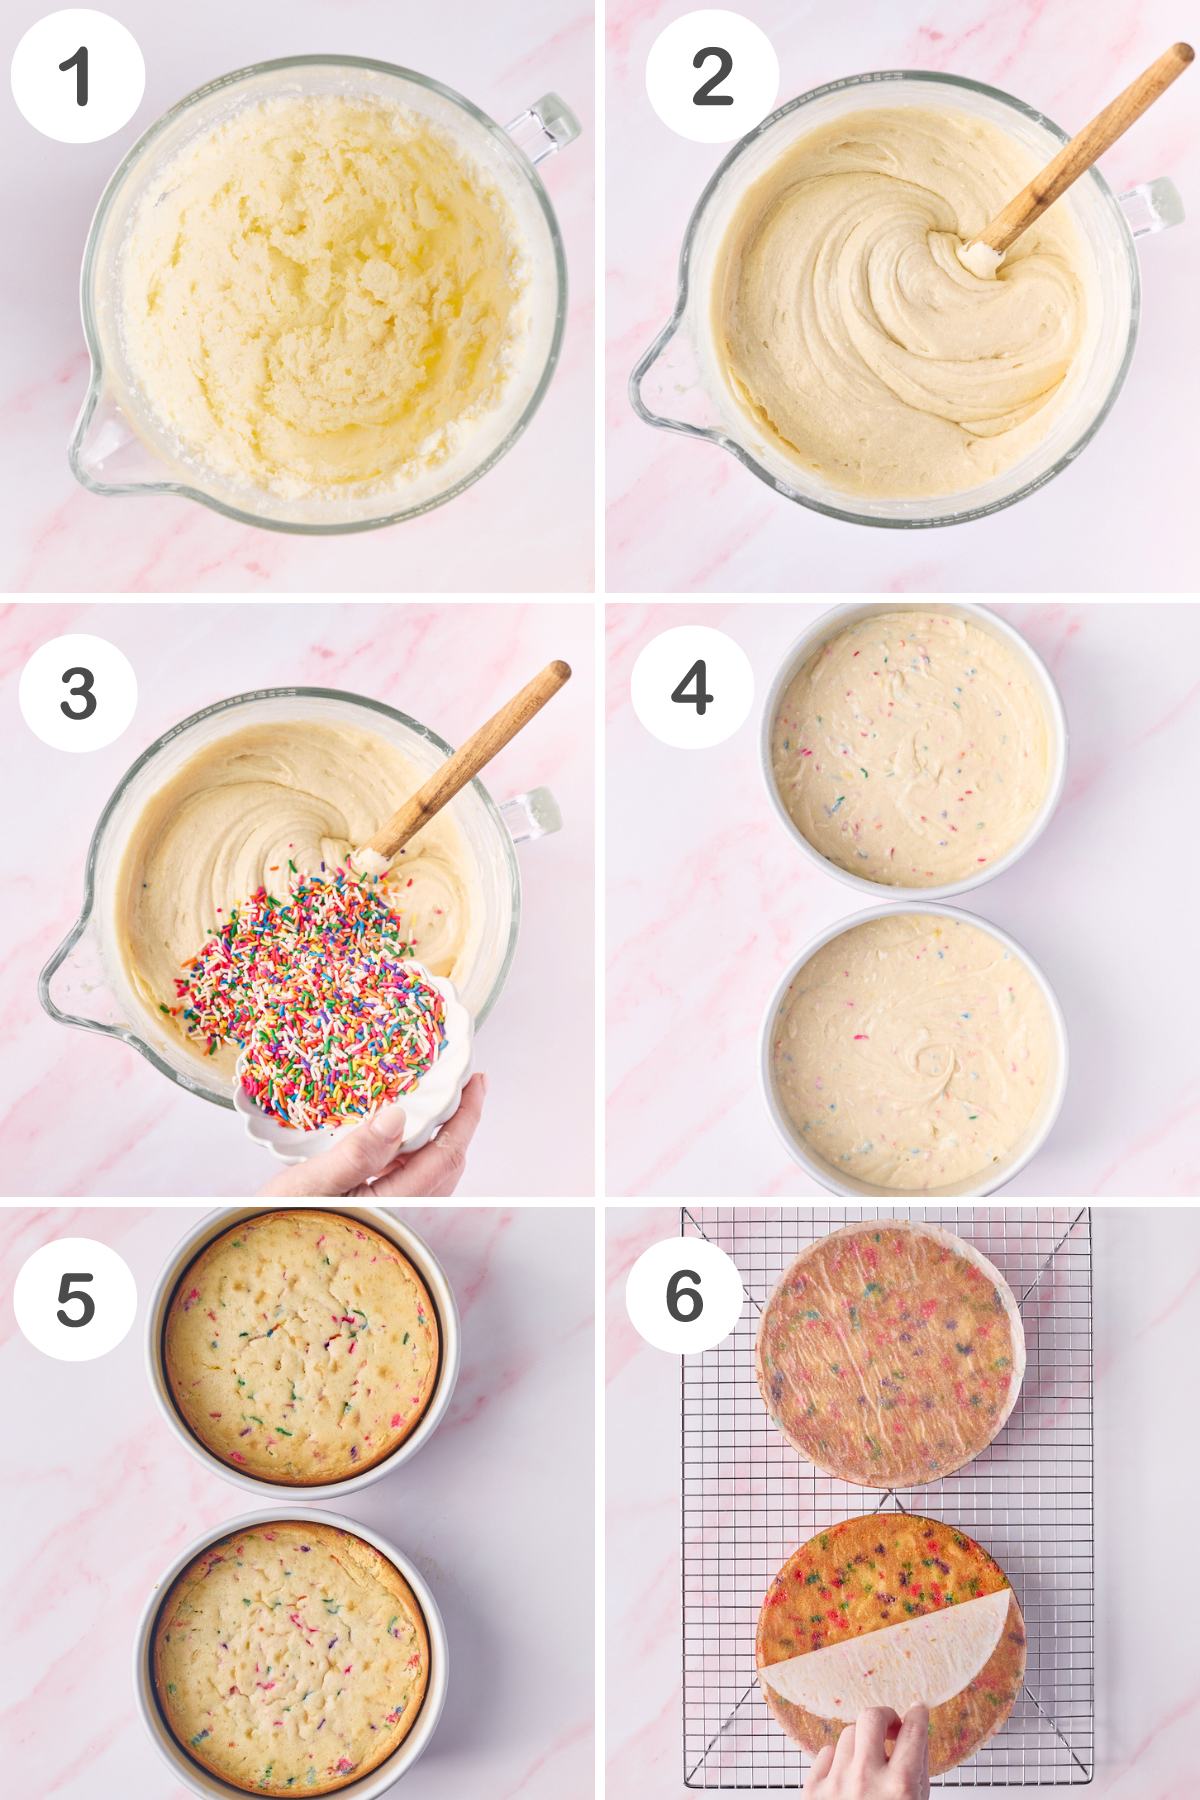 numbered step by step photos showing how to make this cake